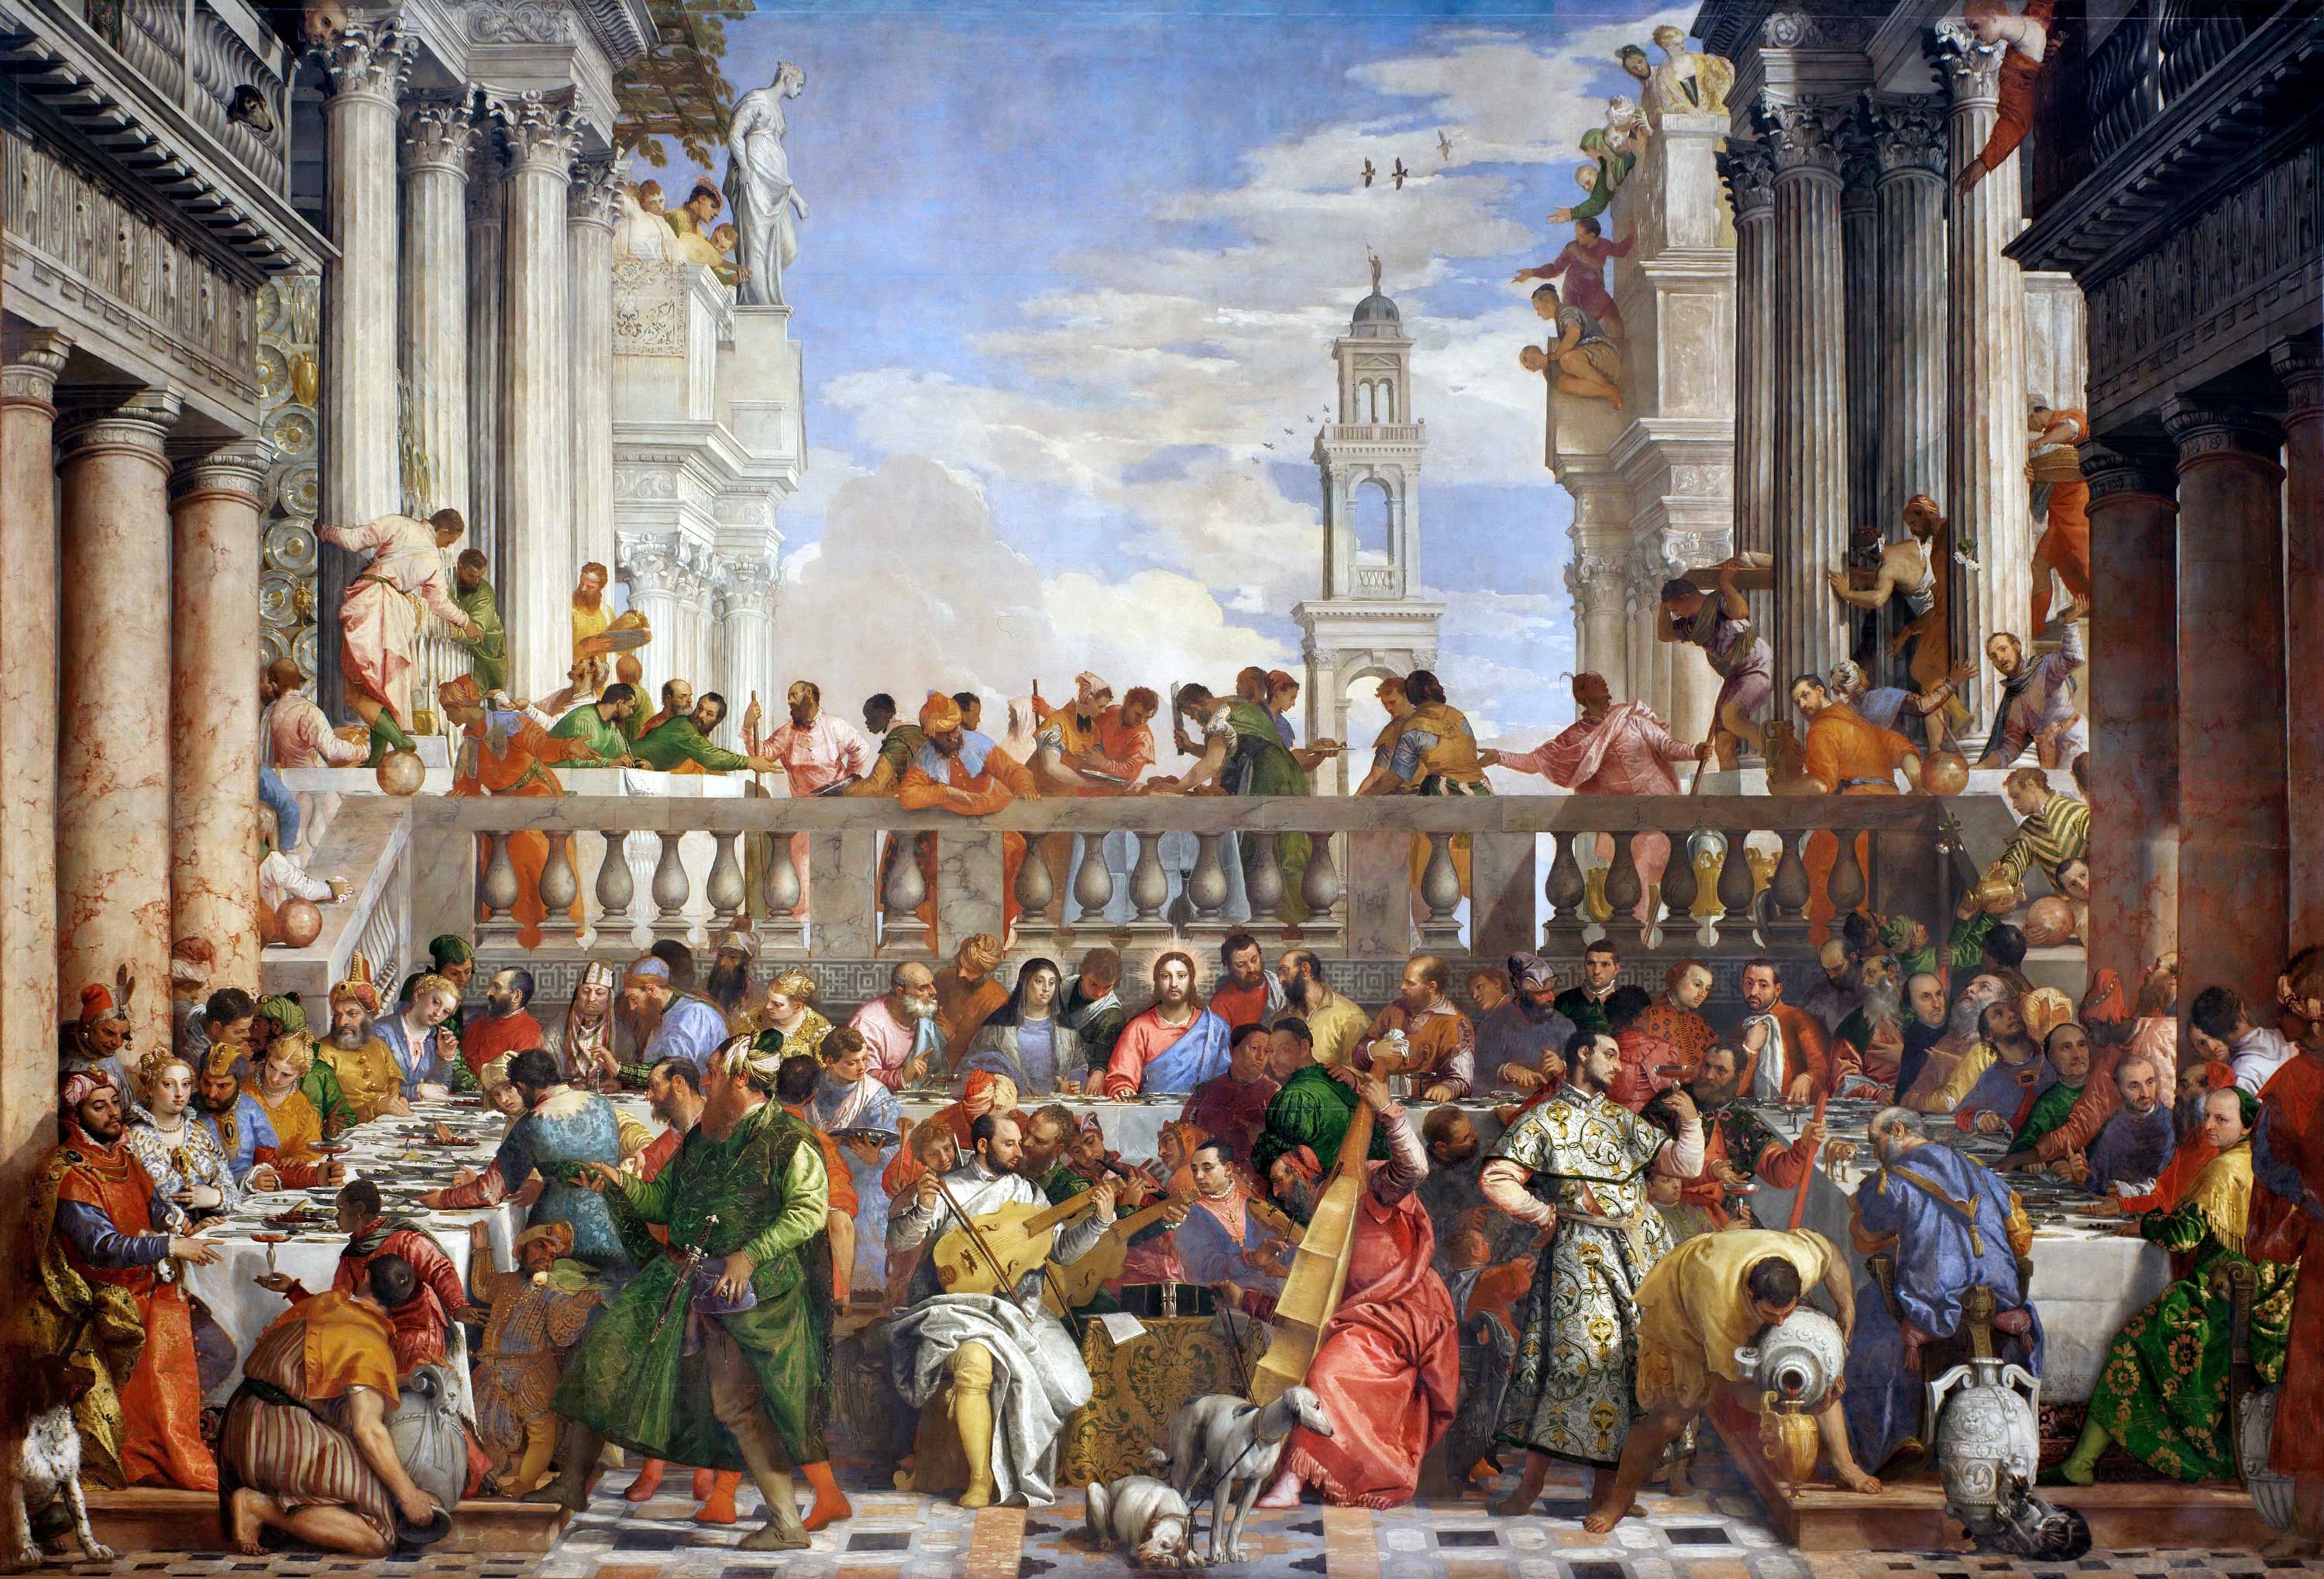 The Wedding Feast at Cana (1563) by Paolo Veronese (1528–1588). This magnificent large painting hangs in the Louvre opposite the Mona Lisa, so it's a pity that very many visitors do not pay it the attention it deserves. The wedding at Cana is the inspiration for the libretto for Mein Gott, wie lang, ach lange?, BWV 155, and Meine Seufzer, meine Tränen, BWV 13.